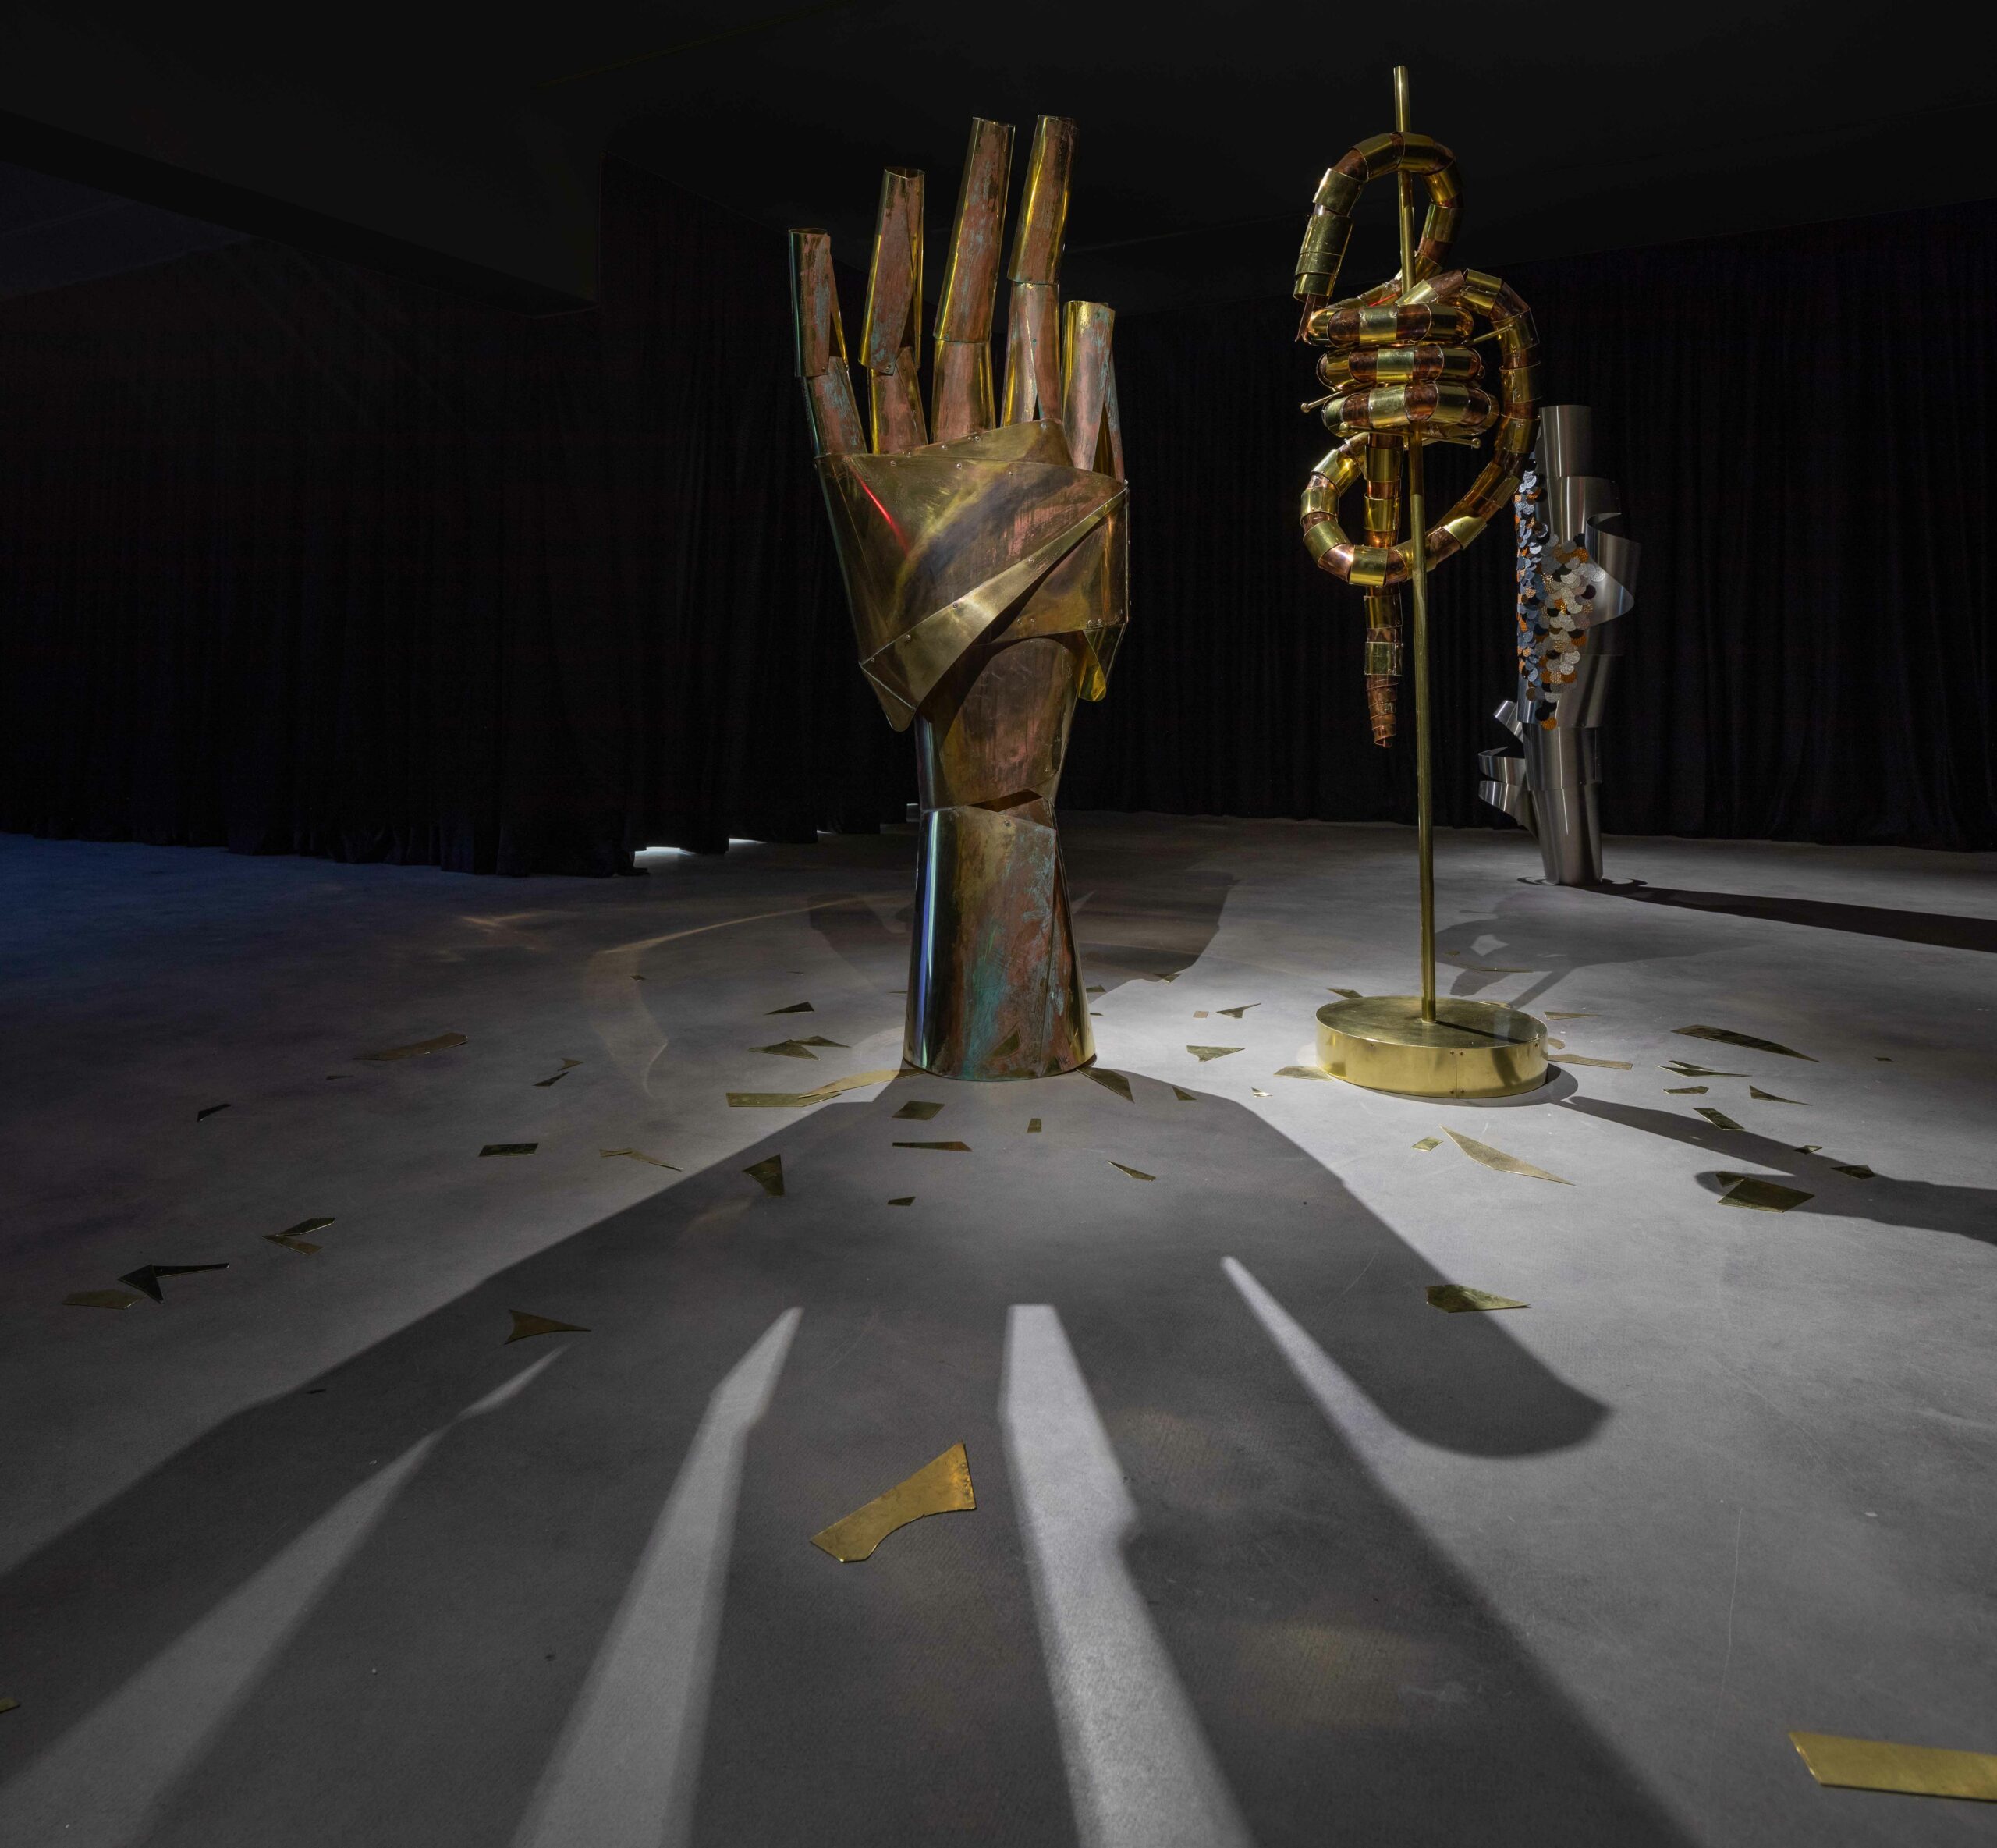 Installation detail of three large scale metal sculptures. One sculpture is a large human hand, the other are two organic shapes